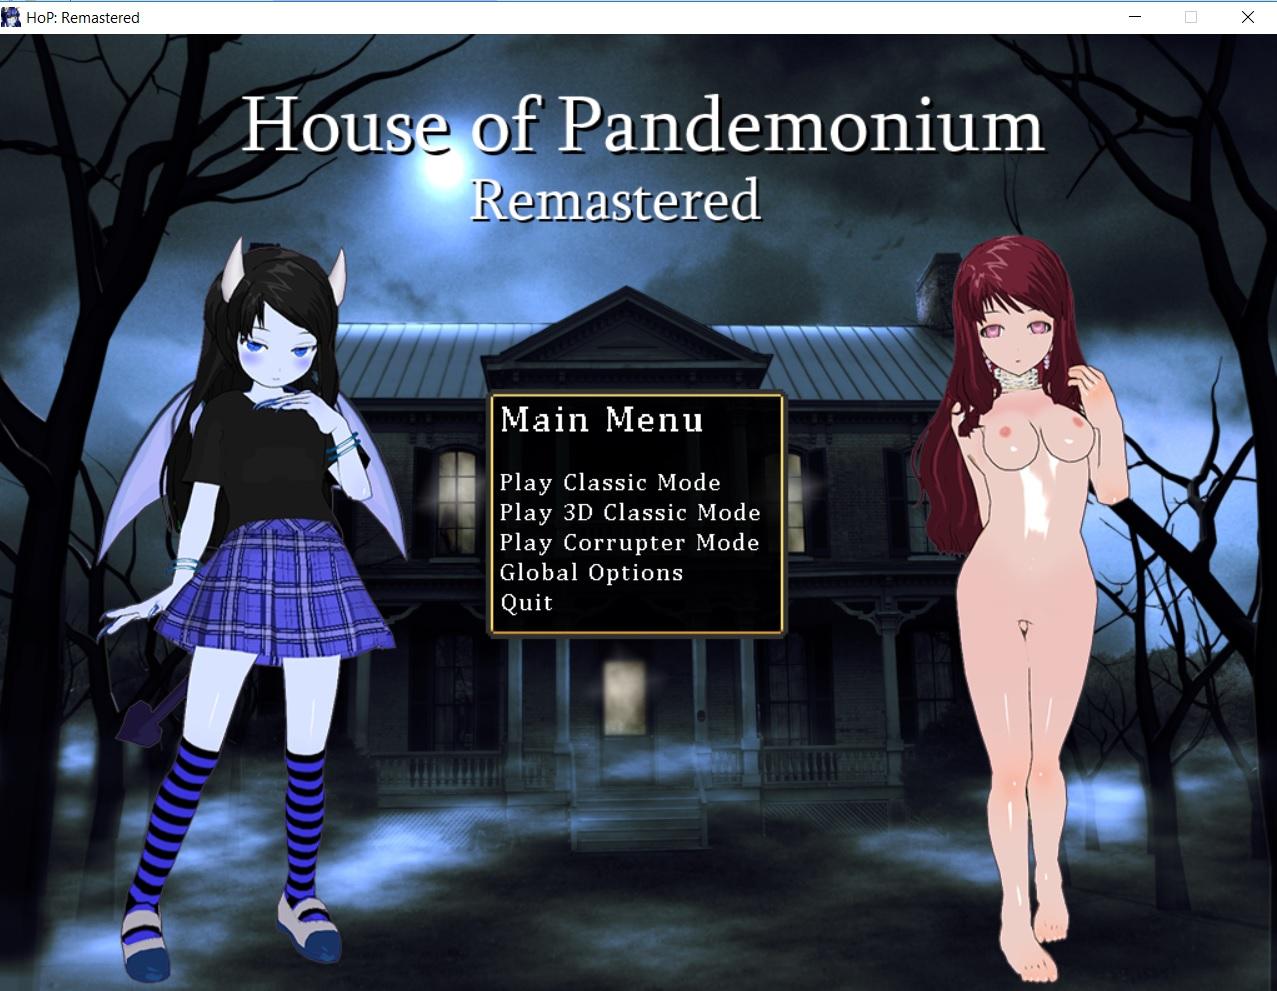 HOUSE OF PANDEMONIUM REMASTERED FROM SALTYJUSTICE